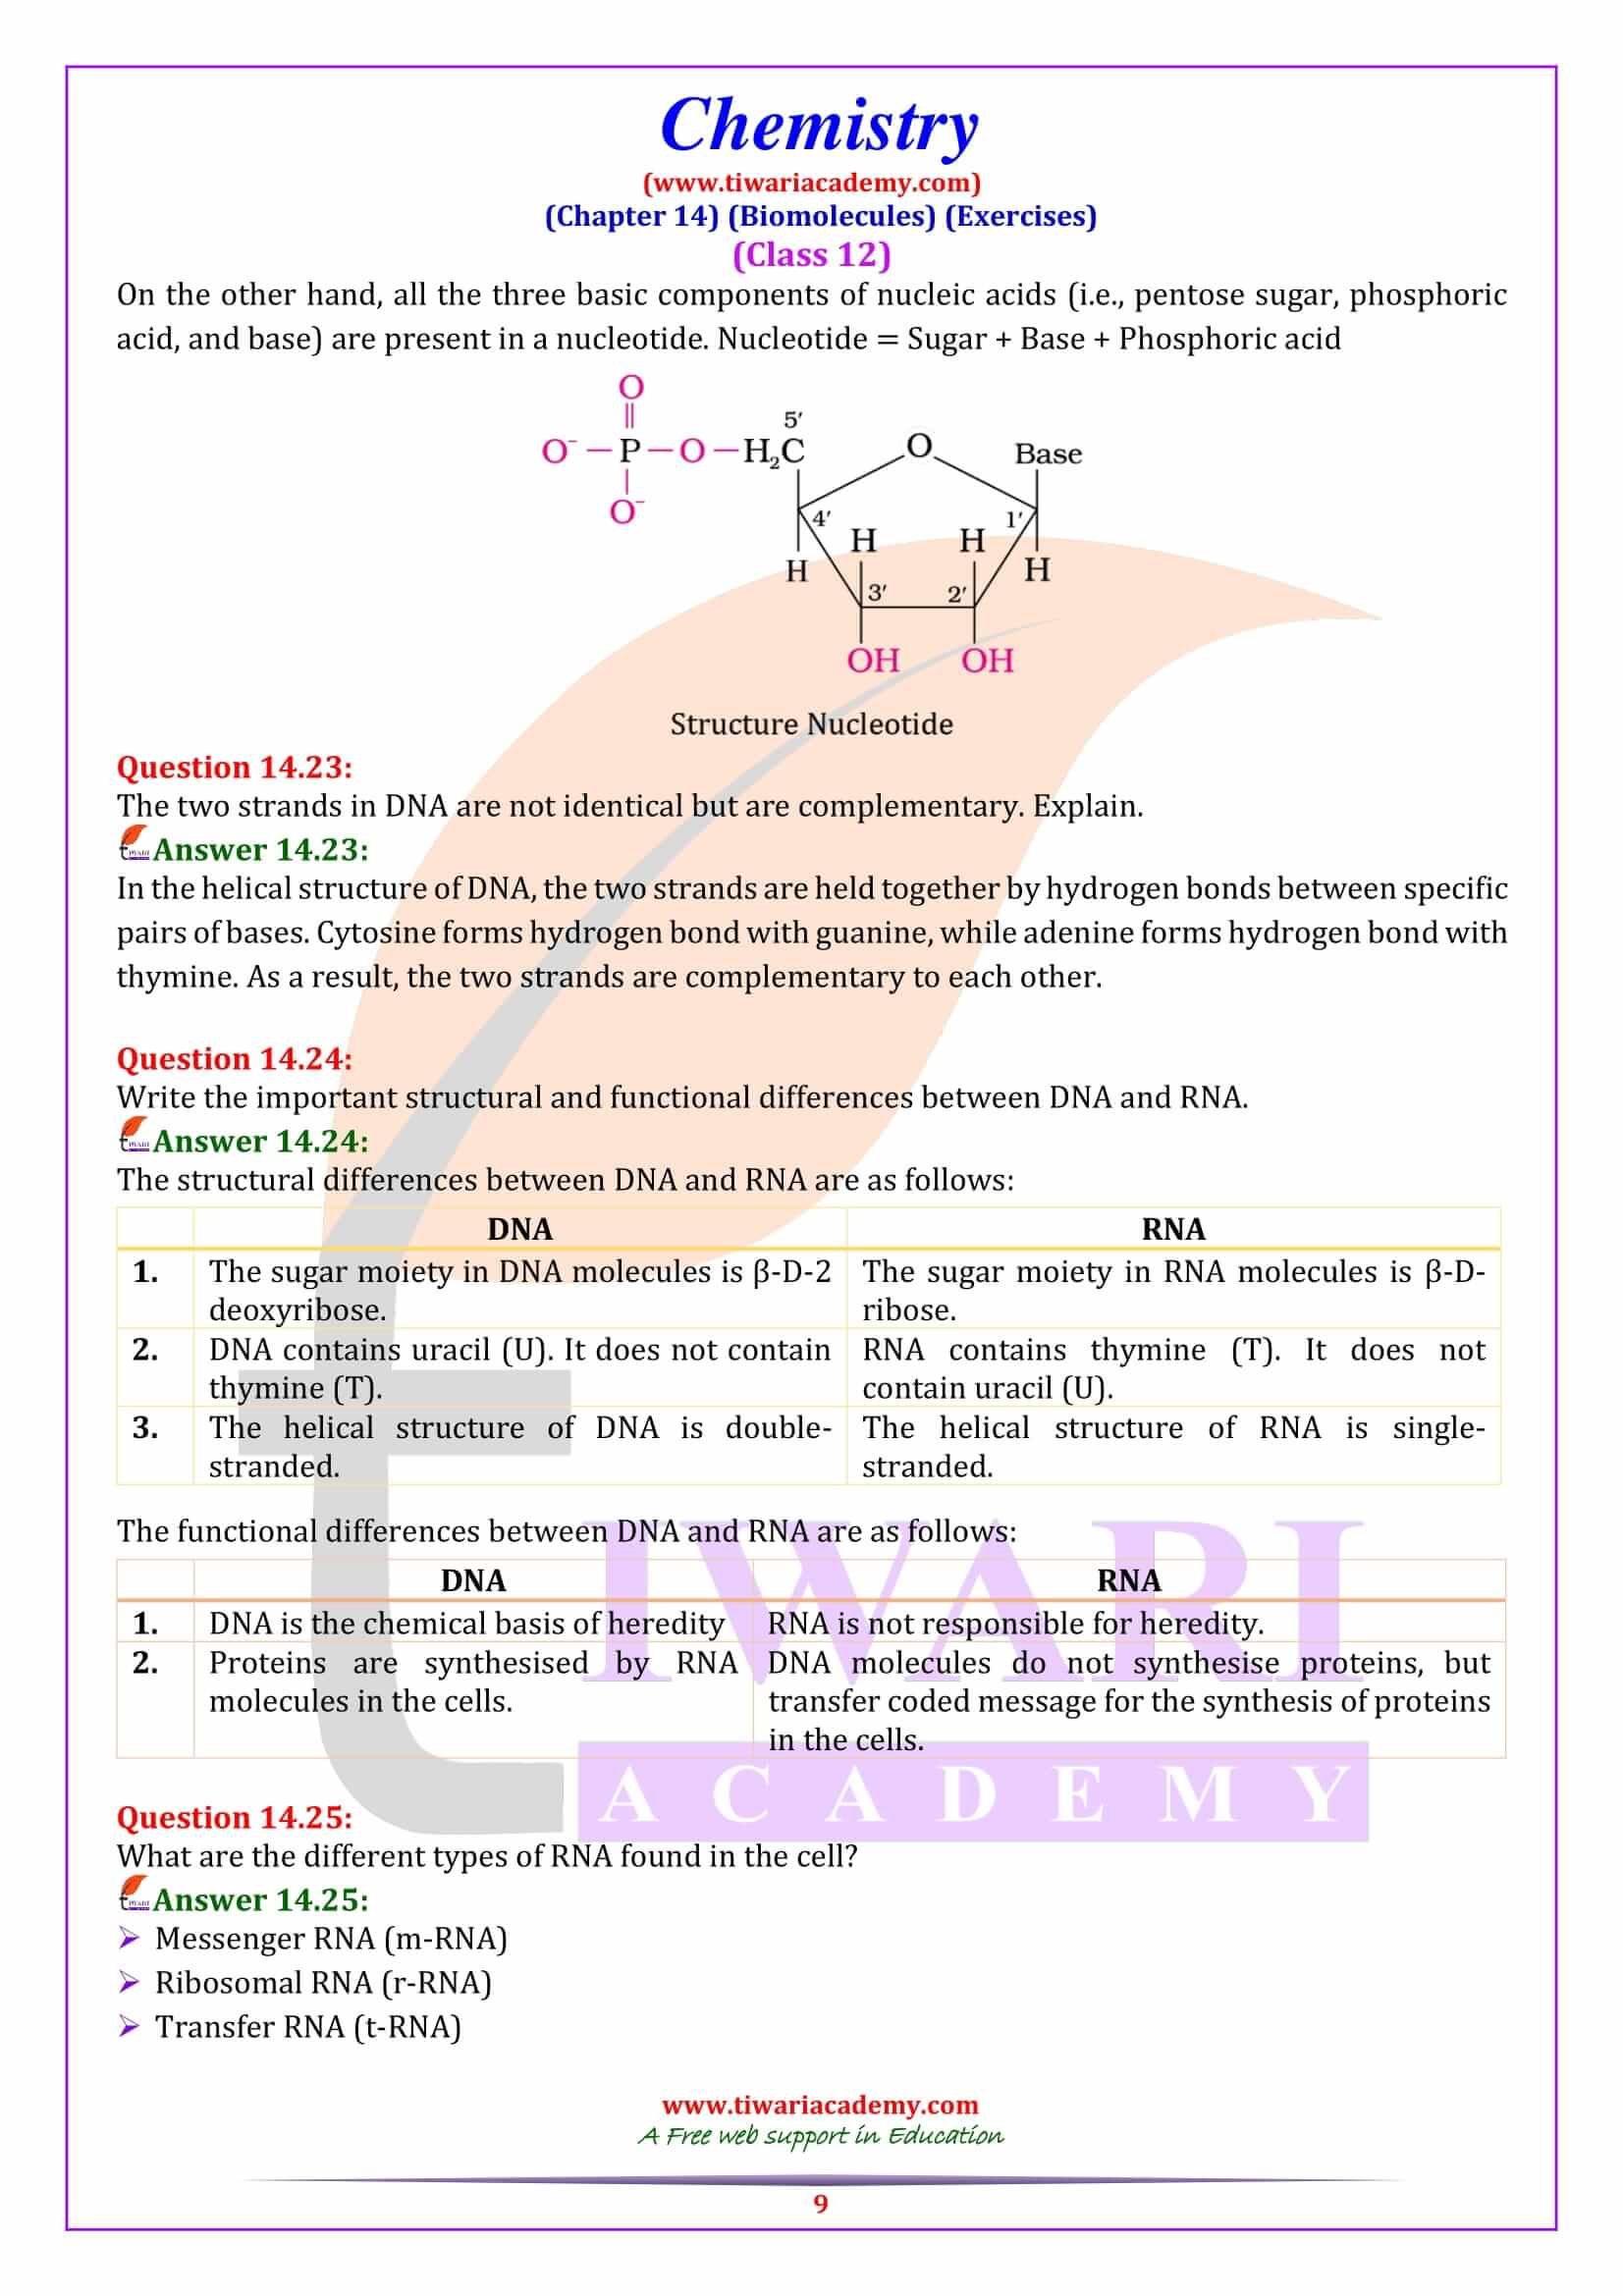 NCERT Solutions for Class 12 Chemistry Chapter 14 Guide